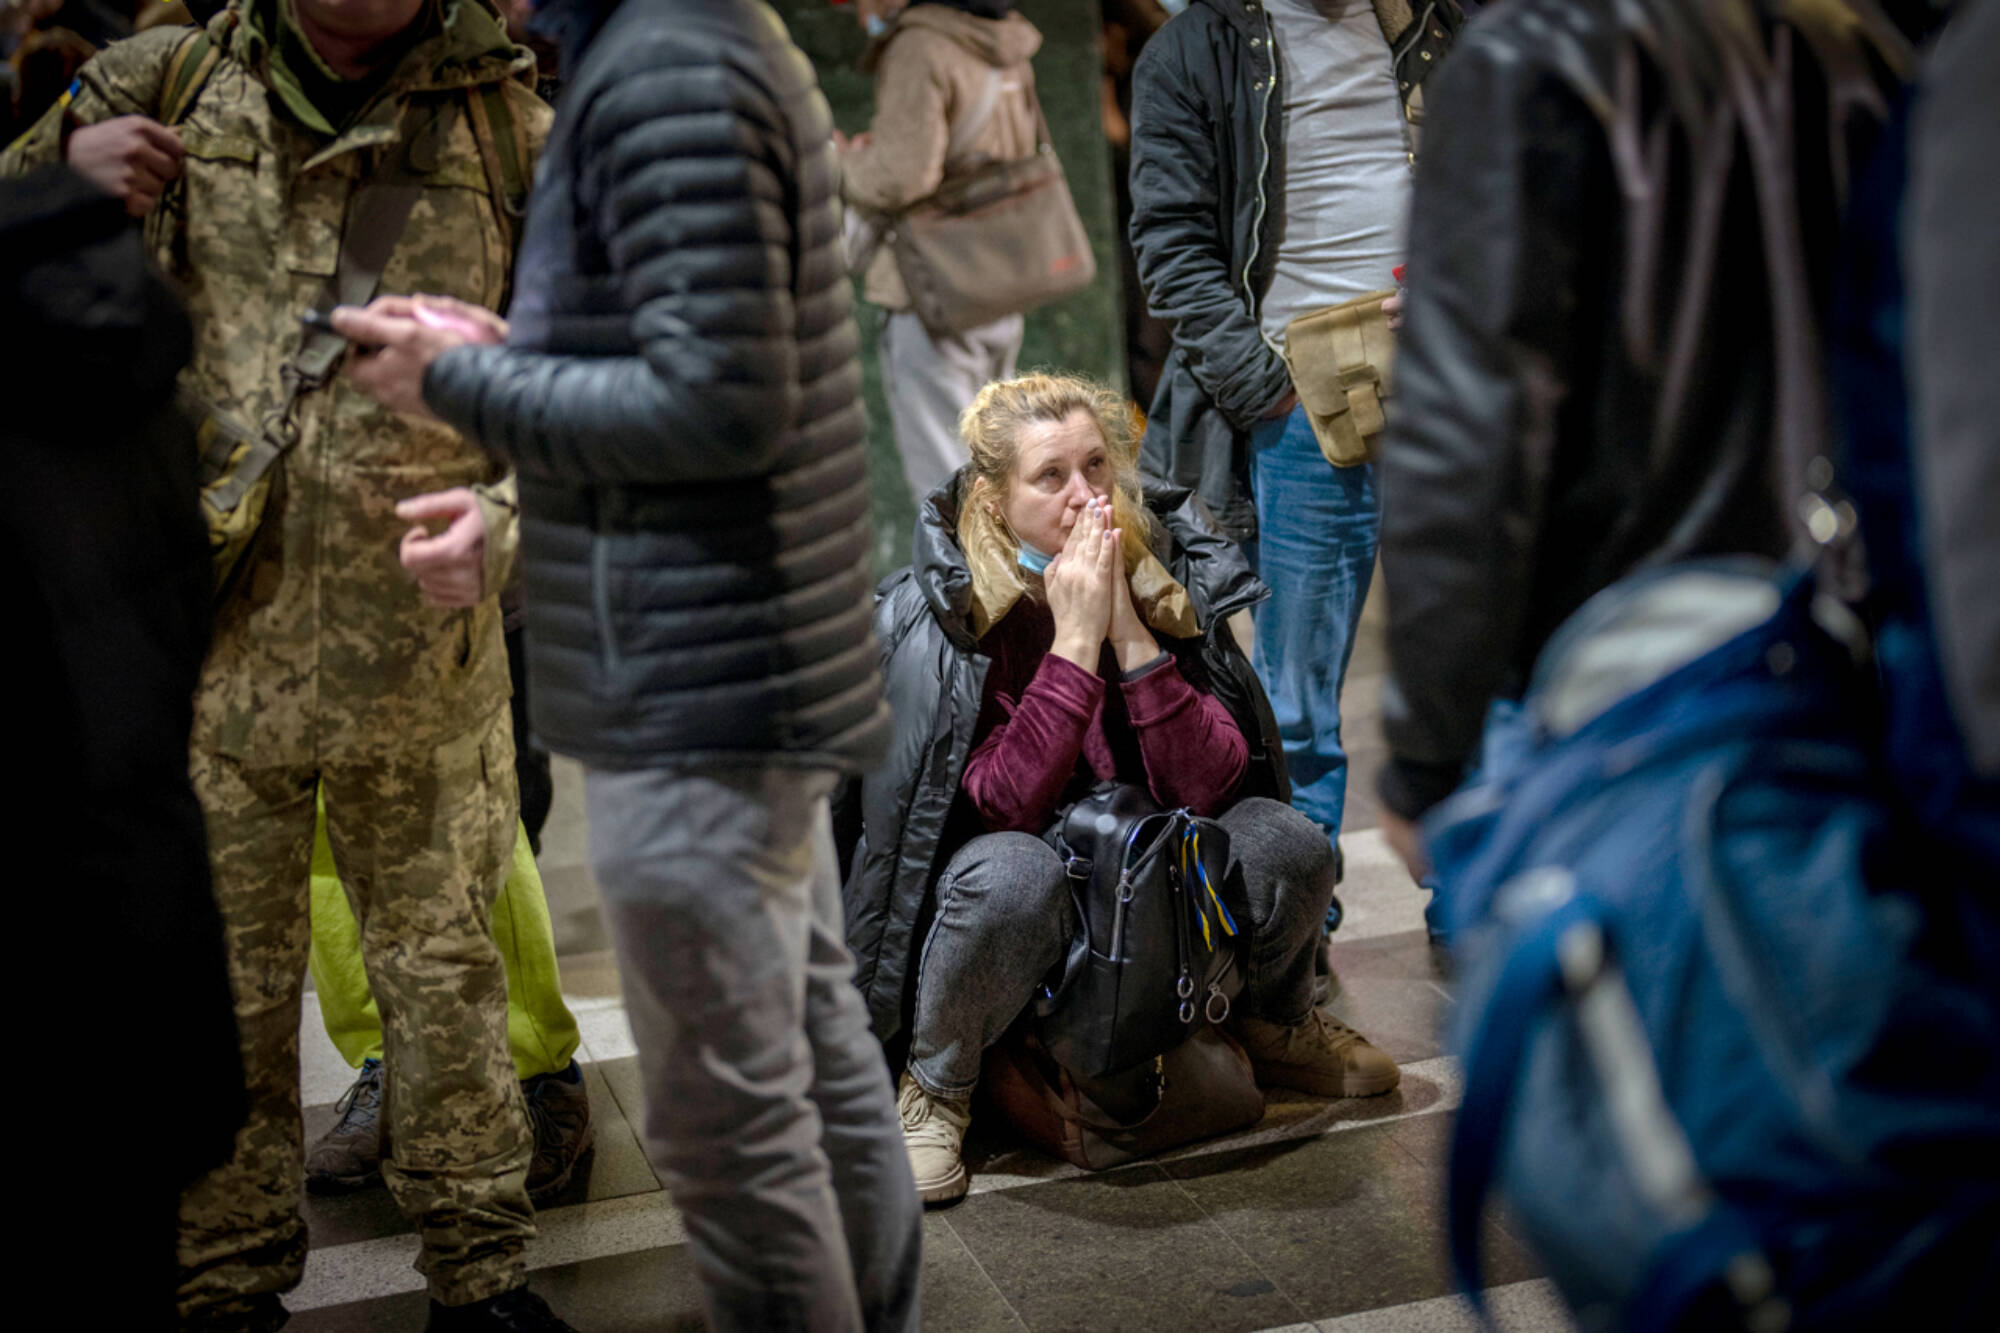 A woman reacts as she waits for a train trying to leave Kyiv, Ukraine, Thursday, Feb. 24, 2022. Russian troops have launched their anticipated attack on Ukraine. Big explosions were heard before dawn in Kyiv, Kharkiv and Odesa as world leaders decried the start of an Russian invasion that could cause massive casualties and topple Ukraine's democratically elected government. (AP Photo/Emilio Morenatti)